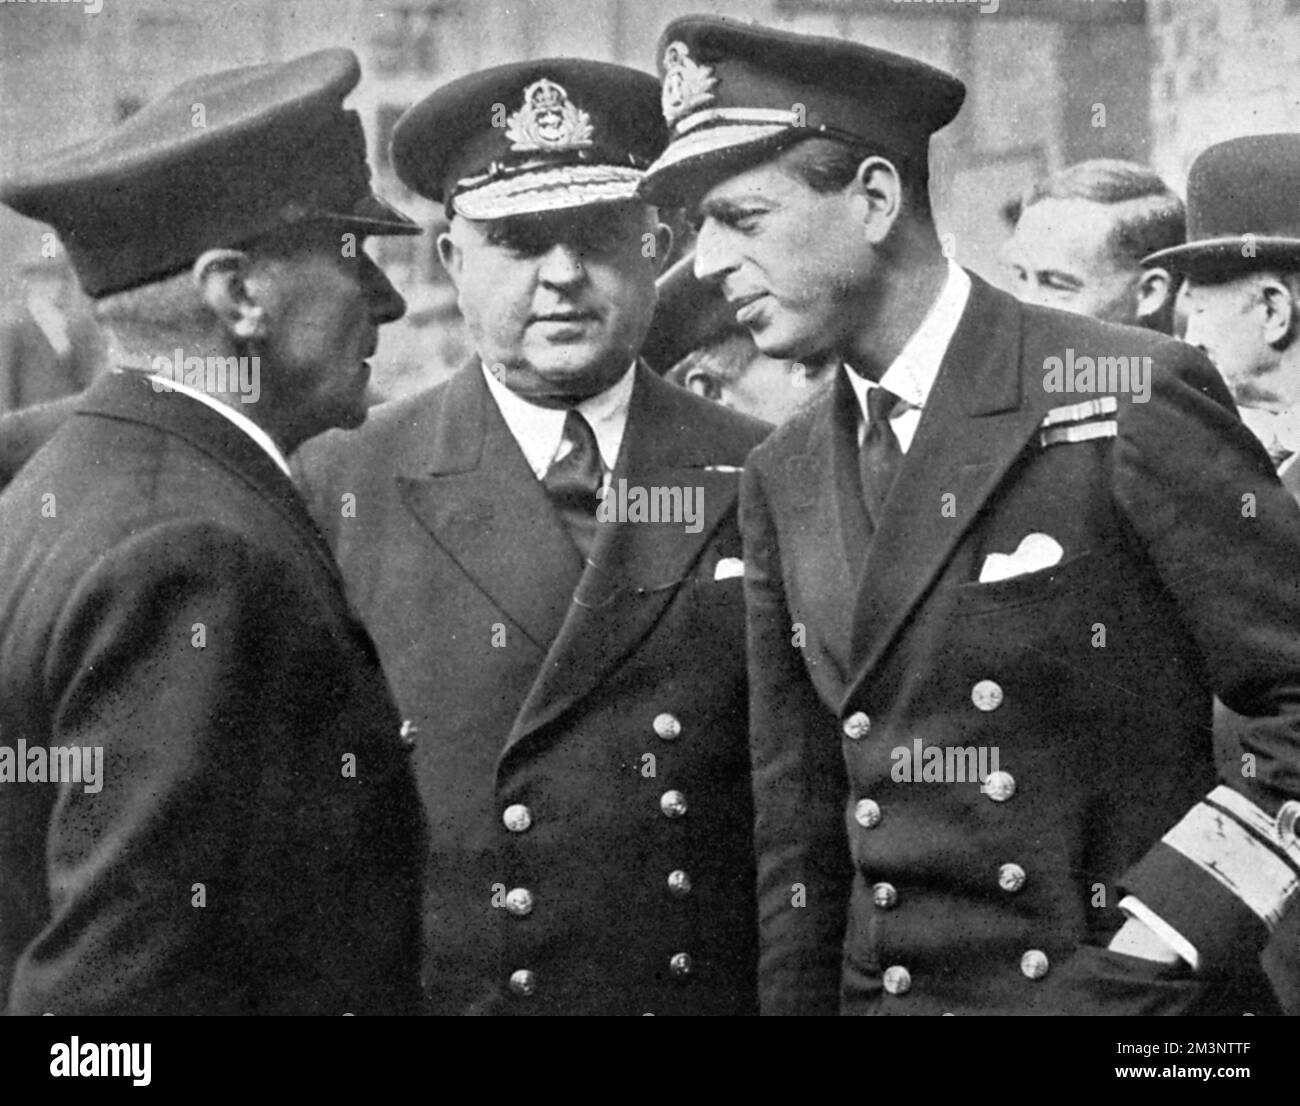 Prince George, Duke of Kent (1900 - 1940), on a tour of naval shipyards in the north during the Second World War.  Pictured here chatting to one of the officials encountered during his tour, with Rear-Admiral Wellwood Maxwell in attendance.       Date: 1939 Stock Photo